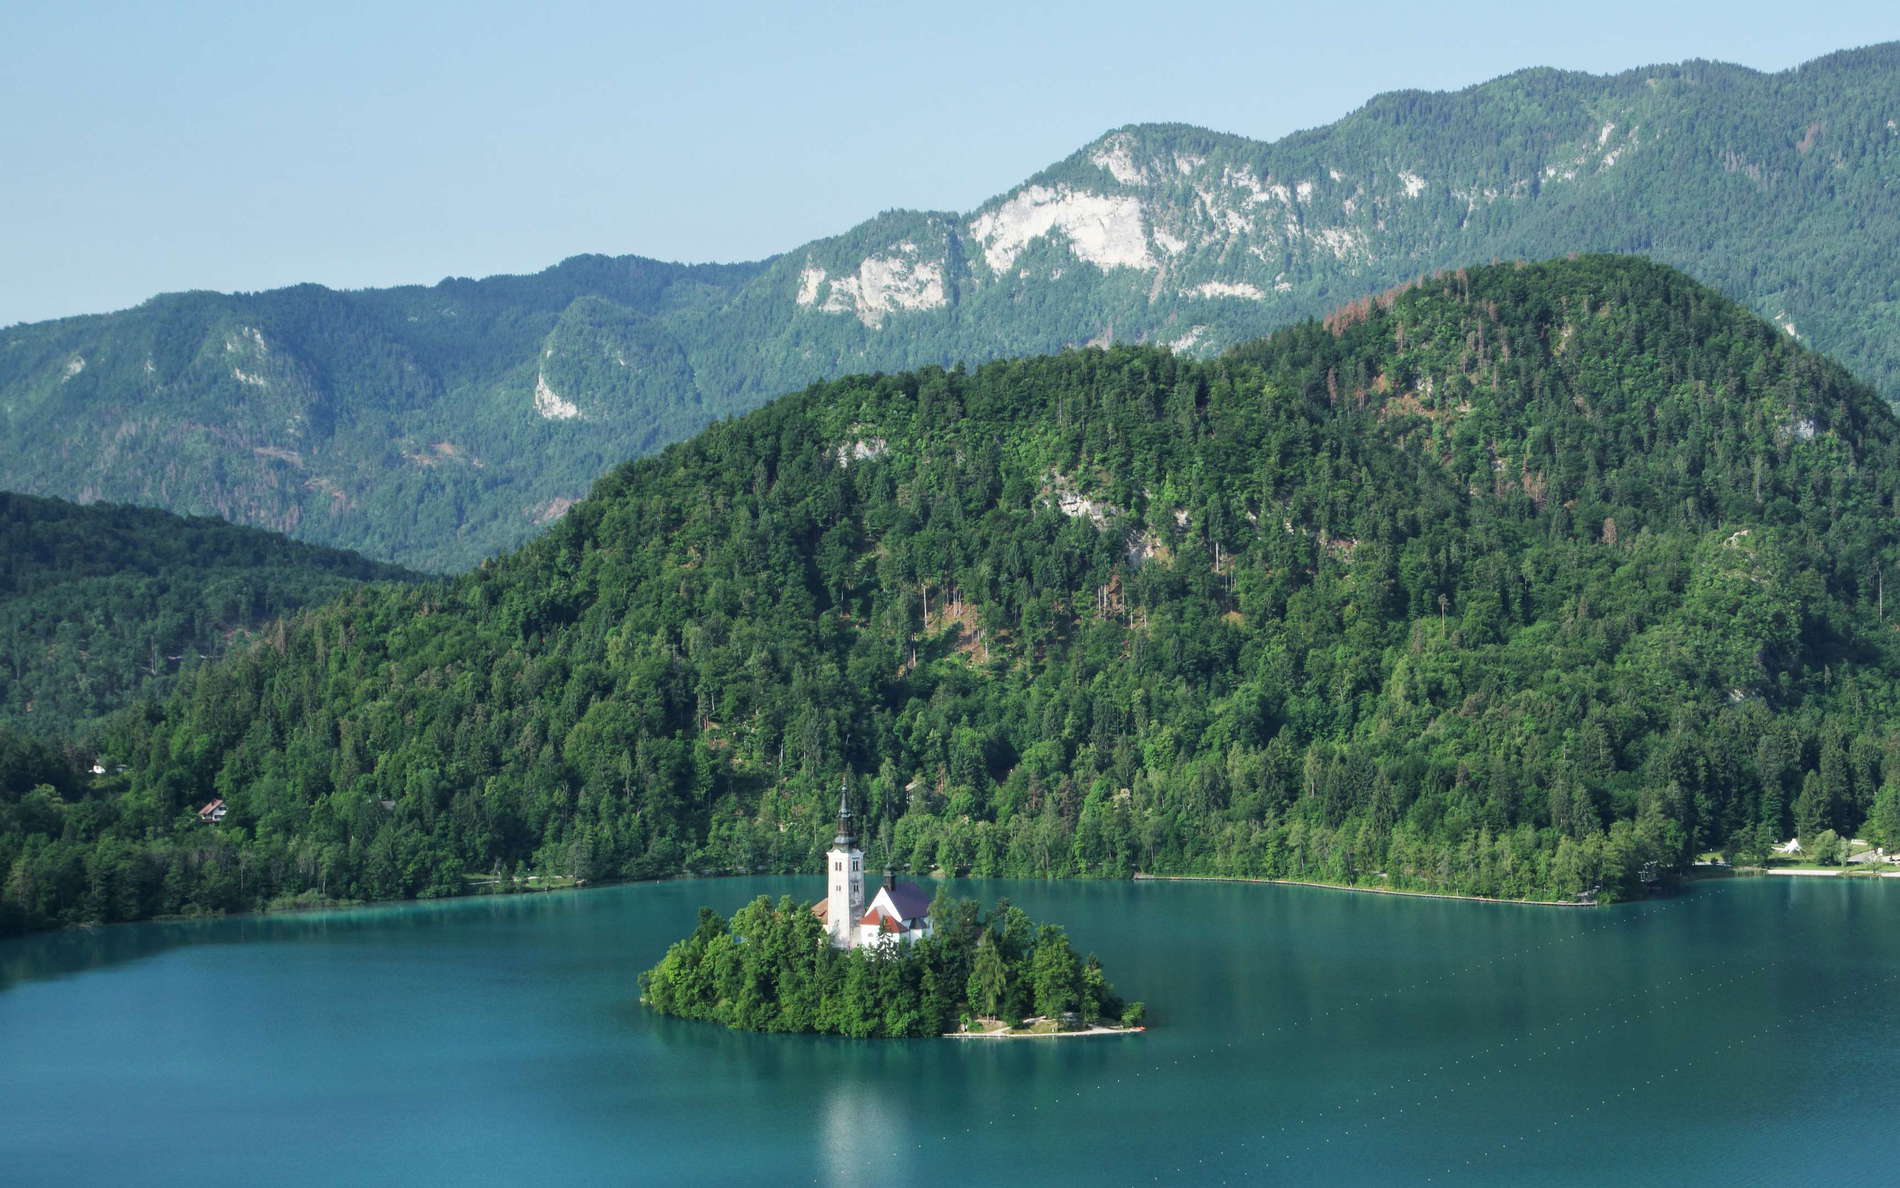 Lake Bled with Bled Island